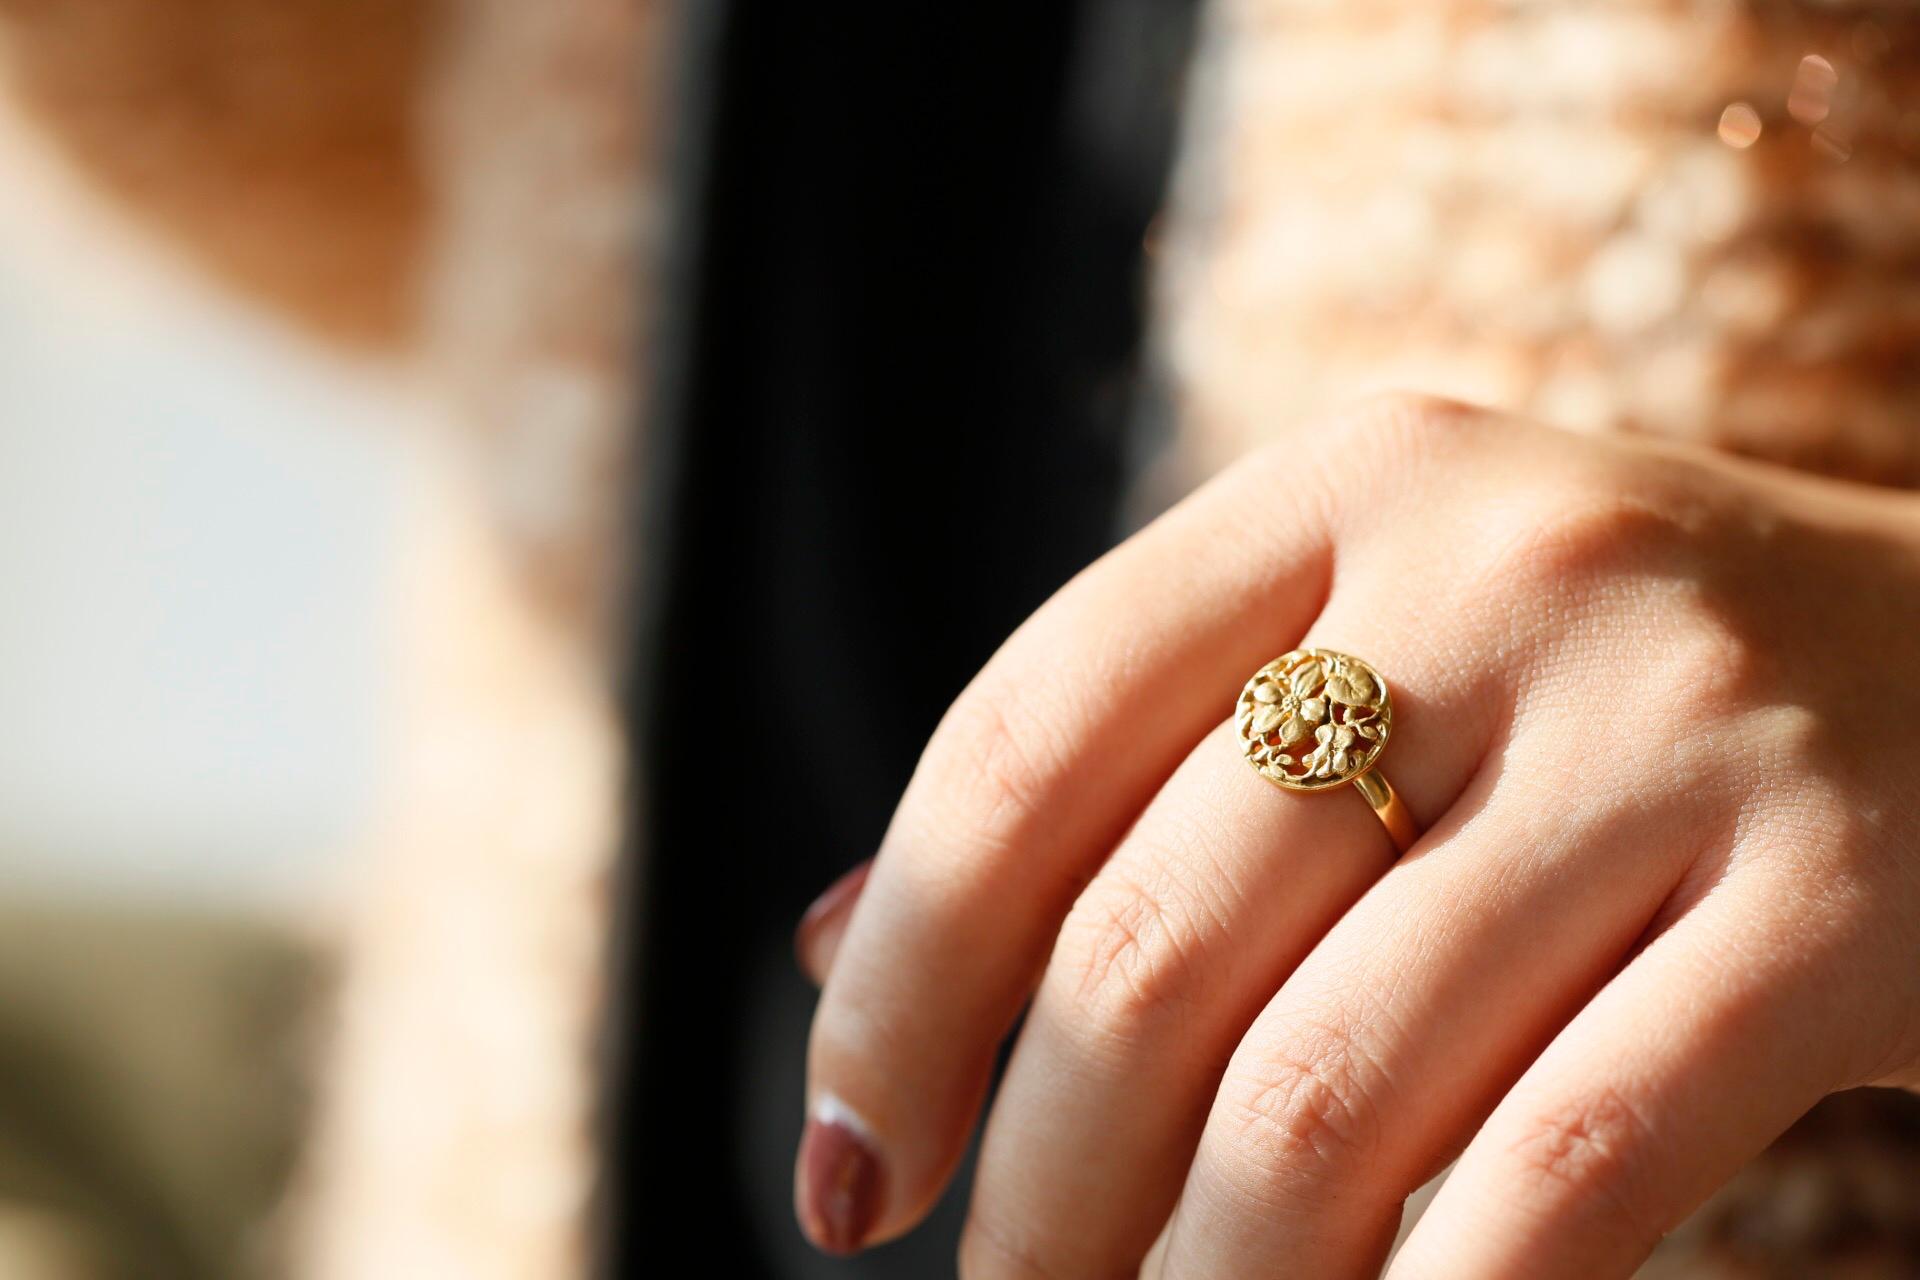 A graceful floral ring, inspired by the Art Nouveau period. A delicately feminine design, enchanting with twists and twines of flowers and leaves.

Designed within a circle, enclosing leaves and vines twisting amongst one another. The contrast of